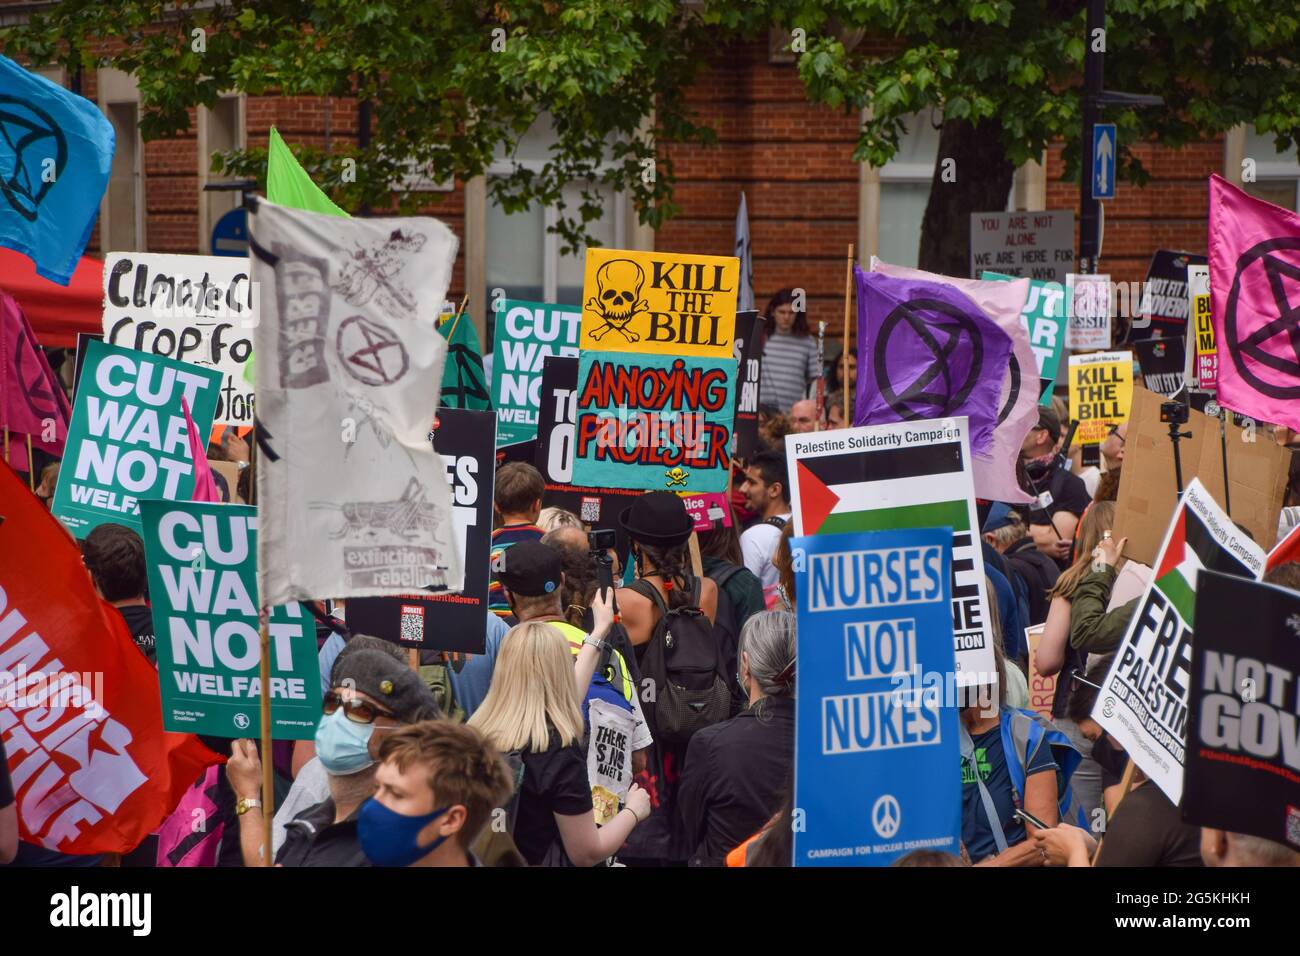 London, United Kingdom. 26th June 2021. Protesters on Regent Street. Several protests took place in the capital, as pro-Palestine, Black Lives Matter, Kill The Bill, Extinction Rebellion, anti-Tory demonstrators, and various other groups marched through Central London. Stock Photo